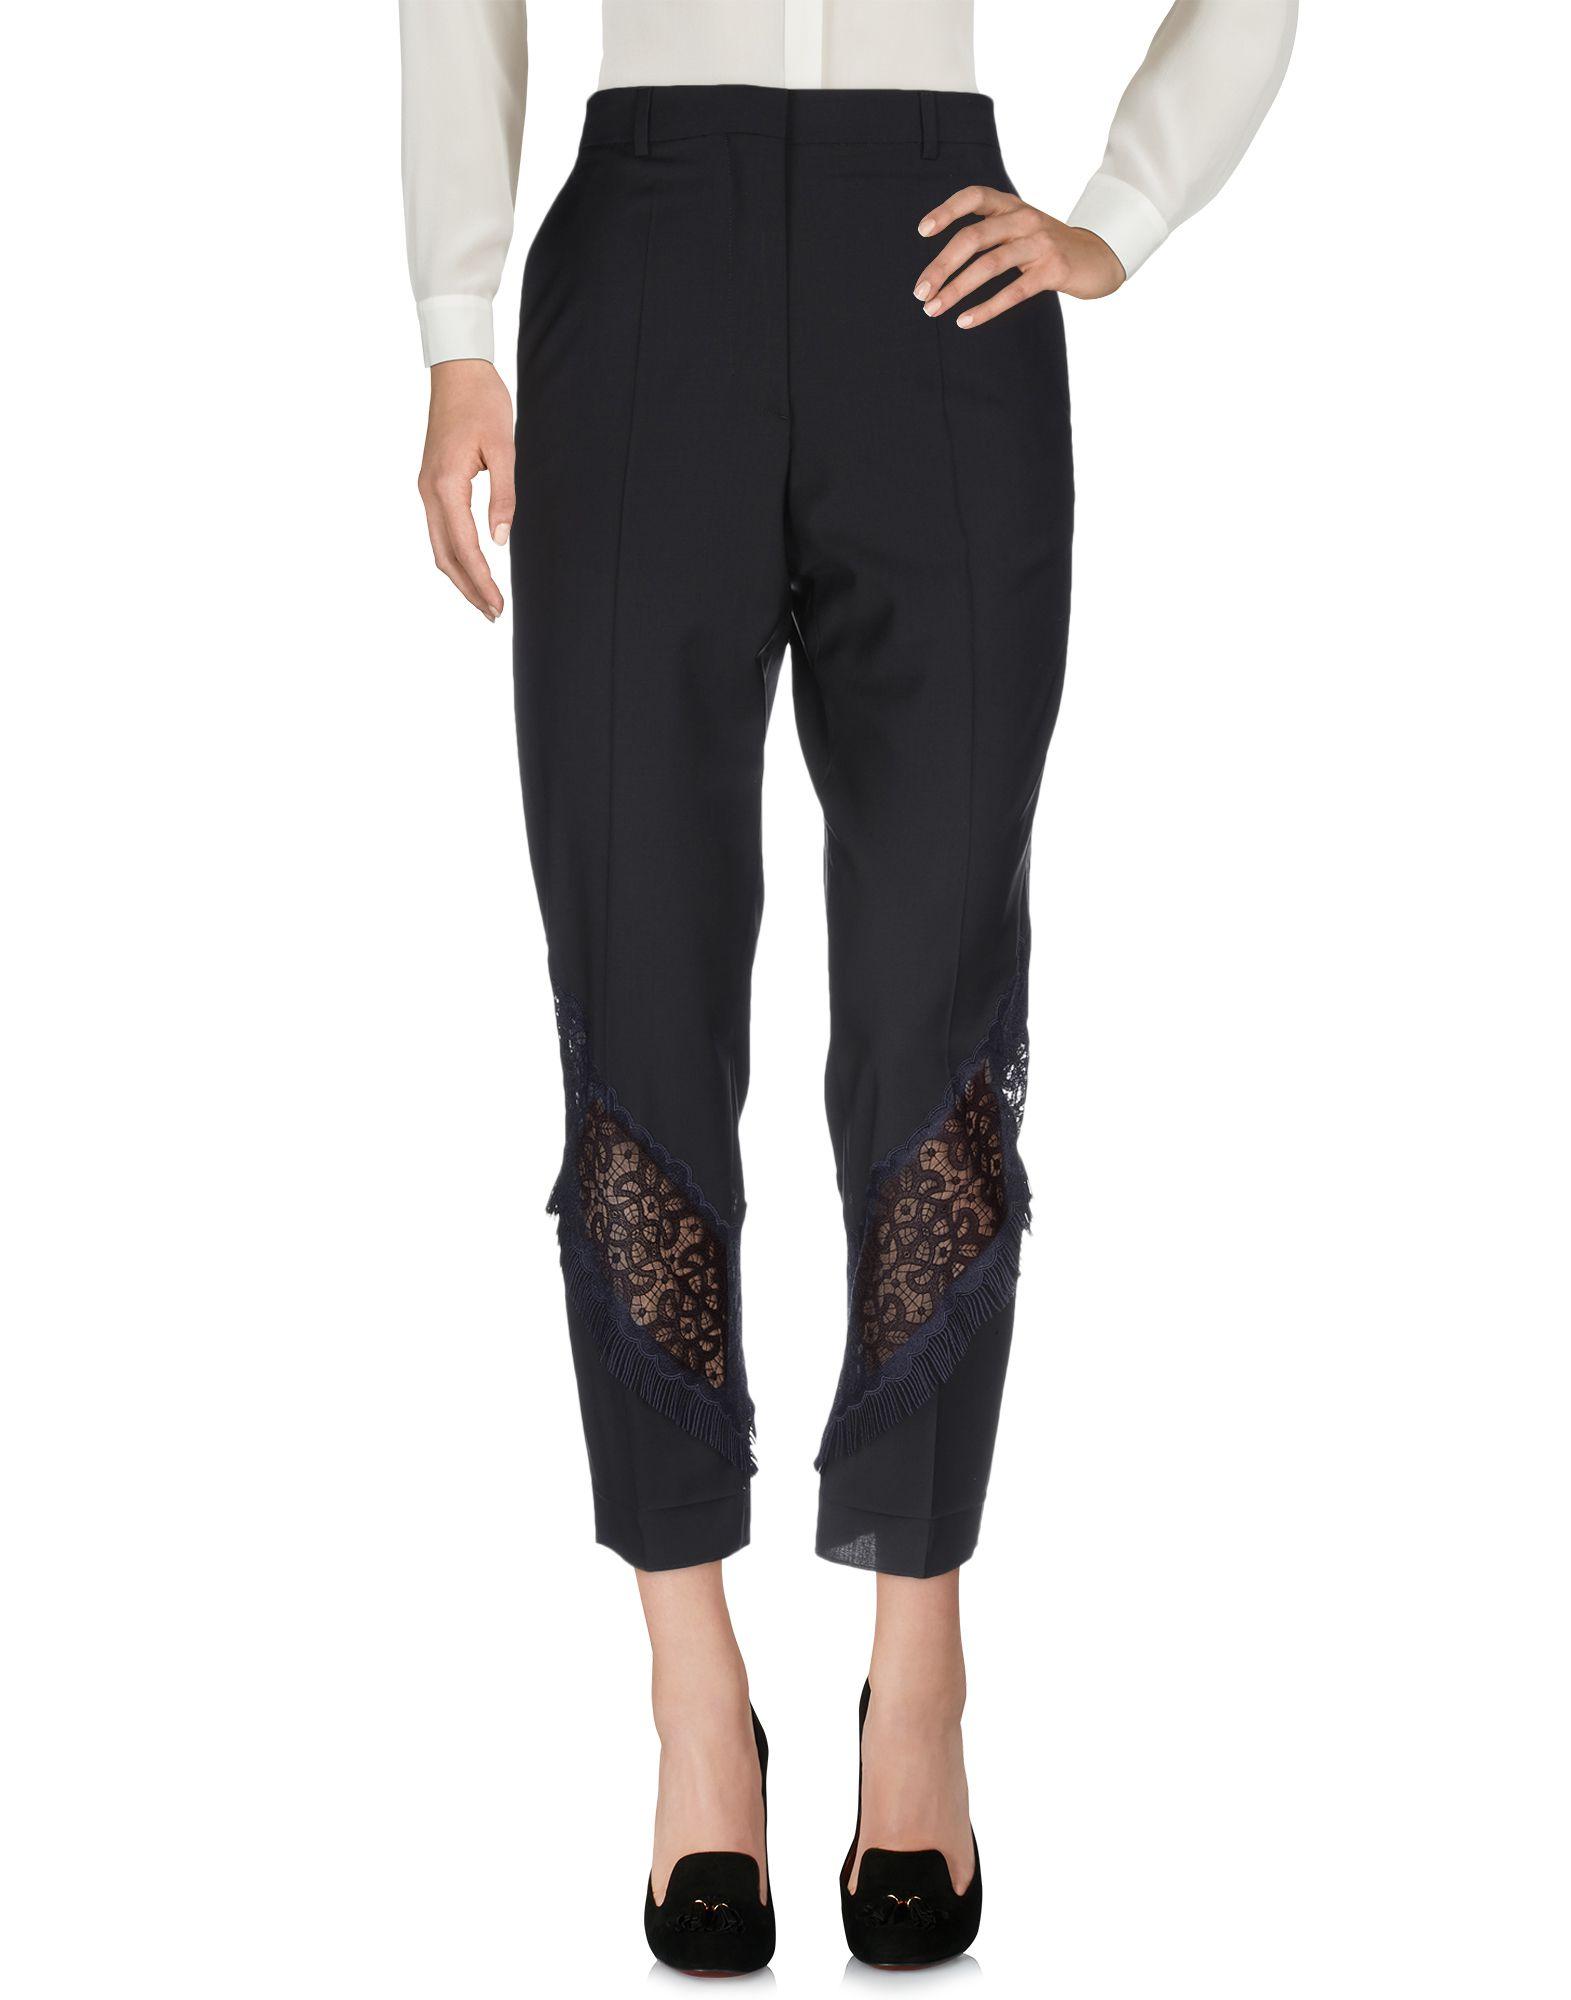 Golden Goose Deluxe Brand Lace Casual Pants in Black - Lyst